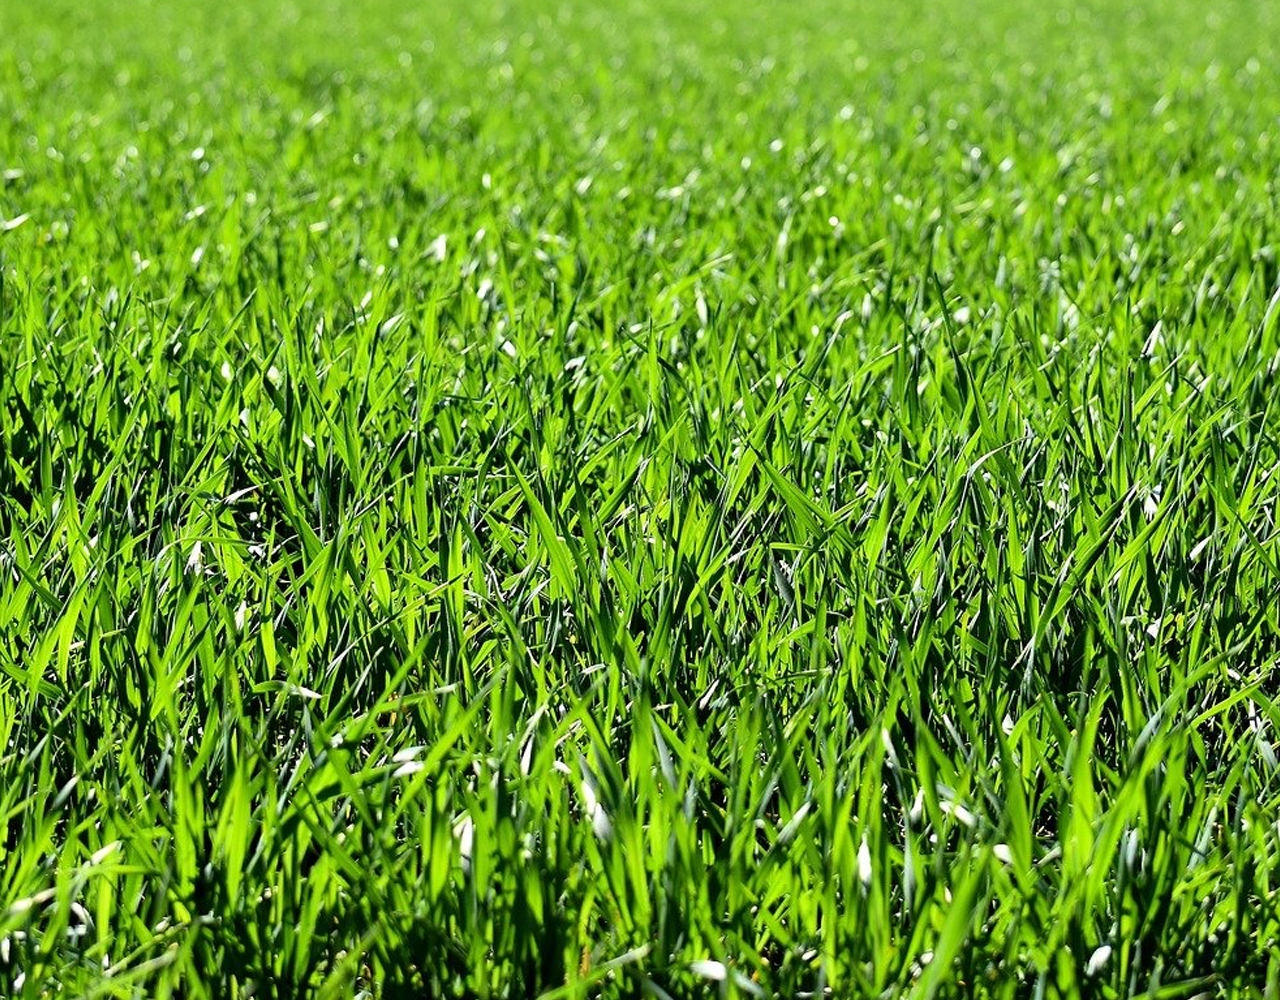 Grass - Your garden in April